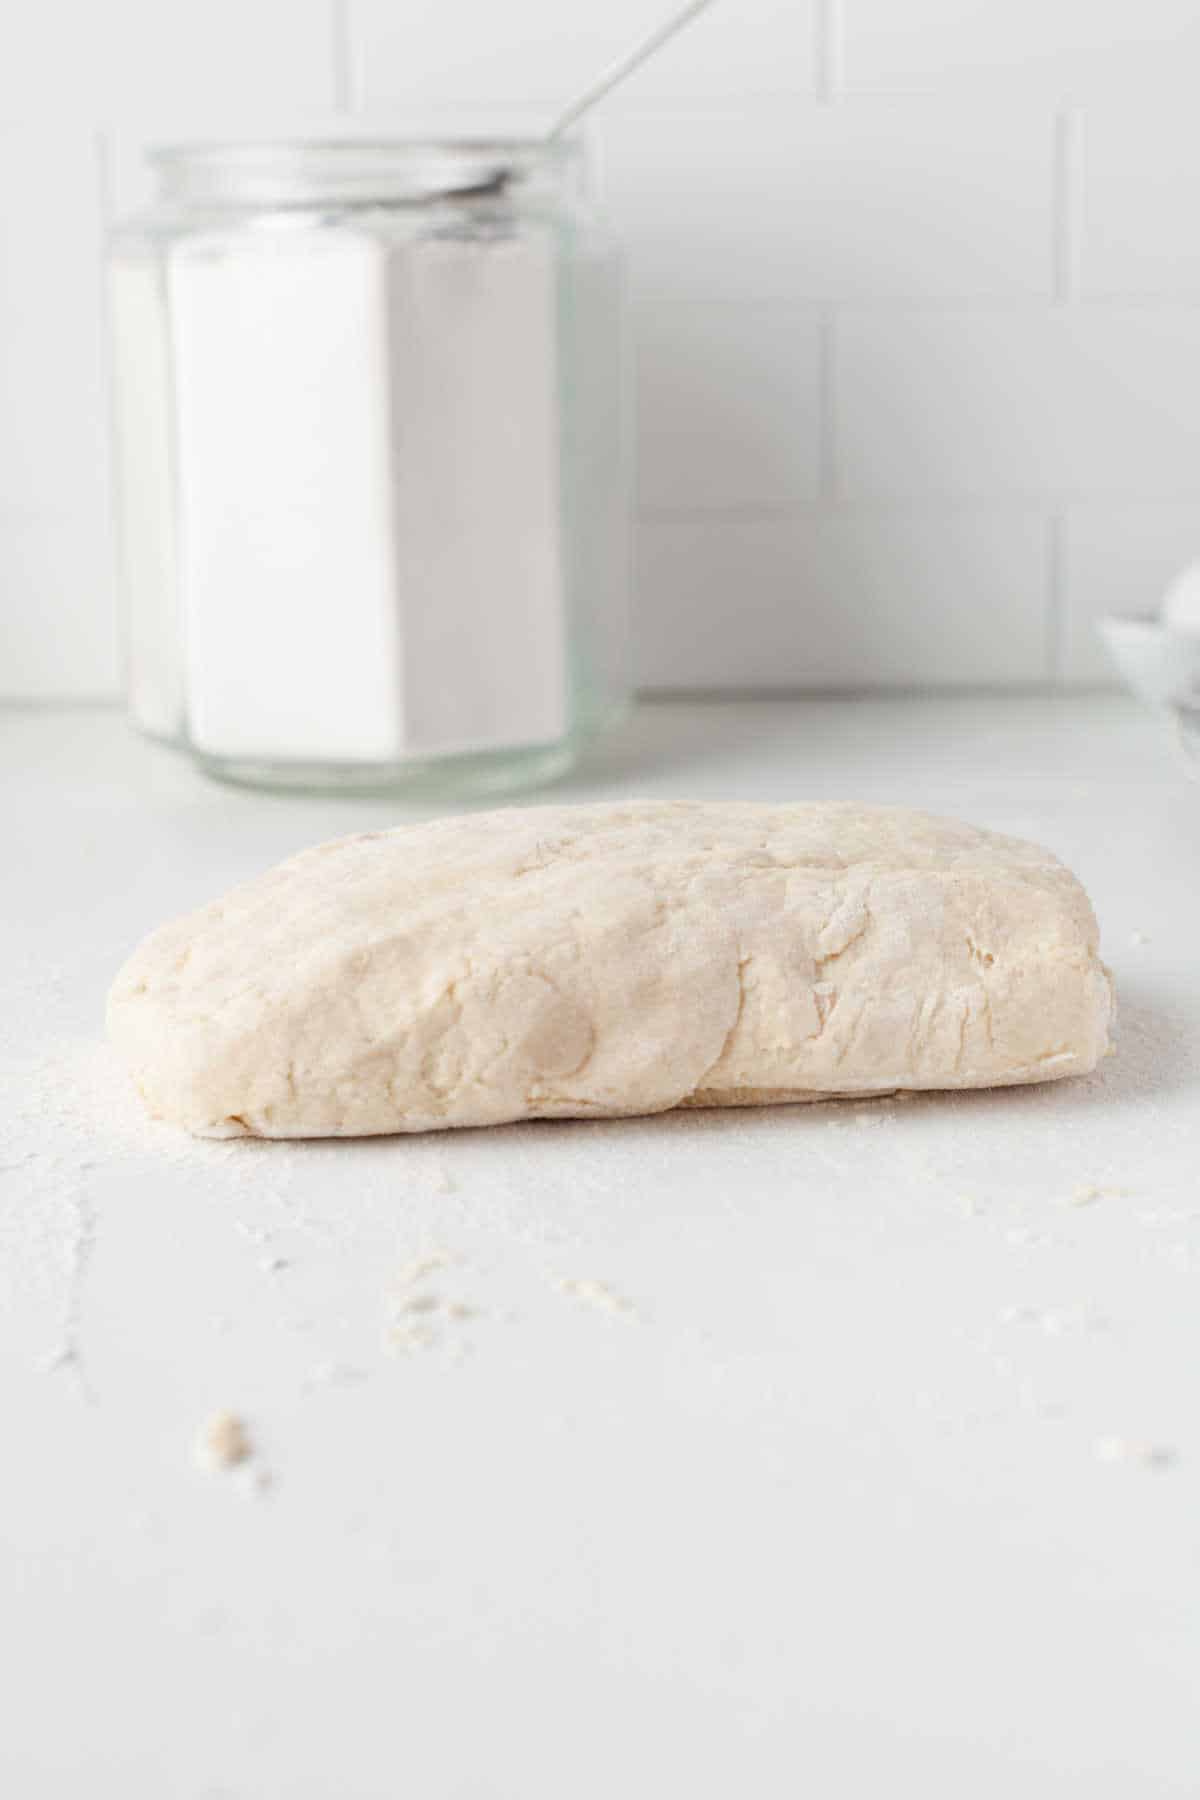 Biscuit dough patted into a rectangle. 